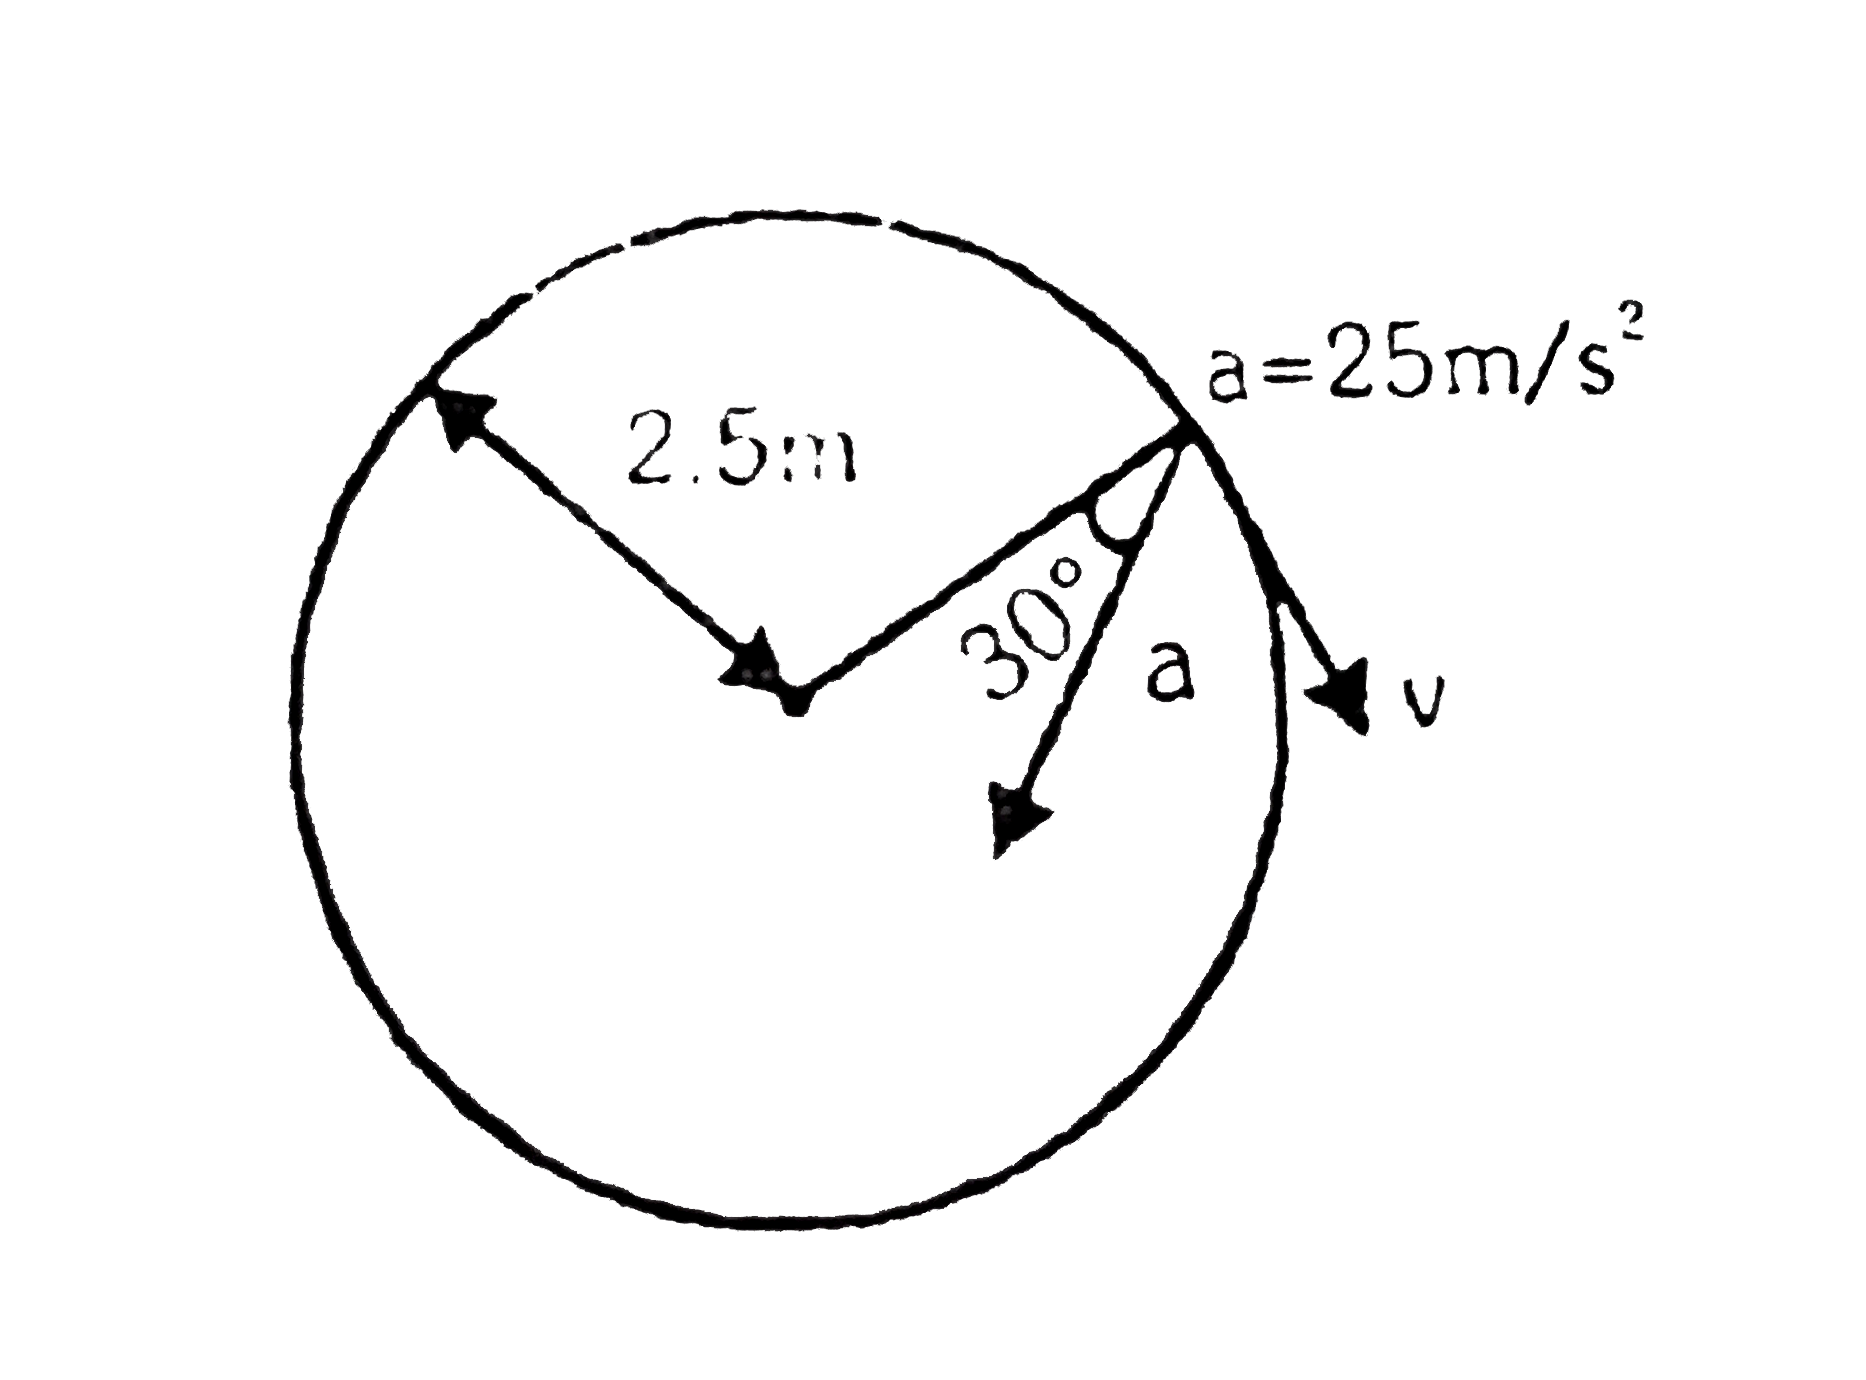 Figure shows the total acceleration and velocity of a particle moving clockwise in a circle of radius 2.5 m at a given instant of time. At this instant, Find: (i) the radial acceleration, (ii) the speed of the particle and (iii) its tangential acceleration.